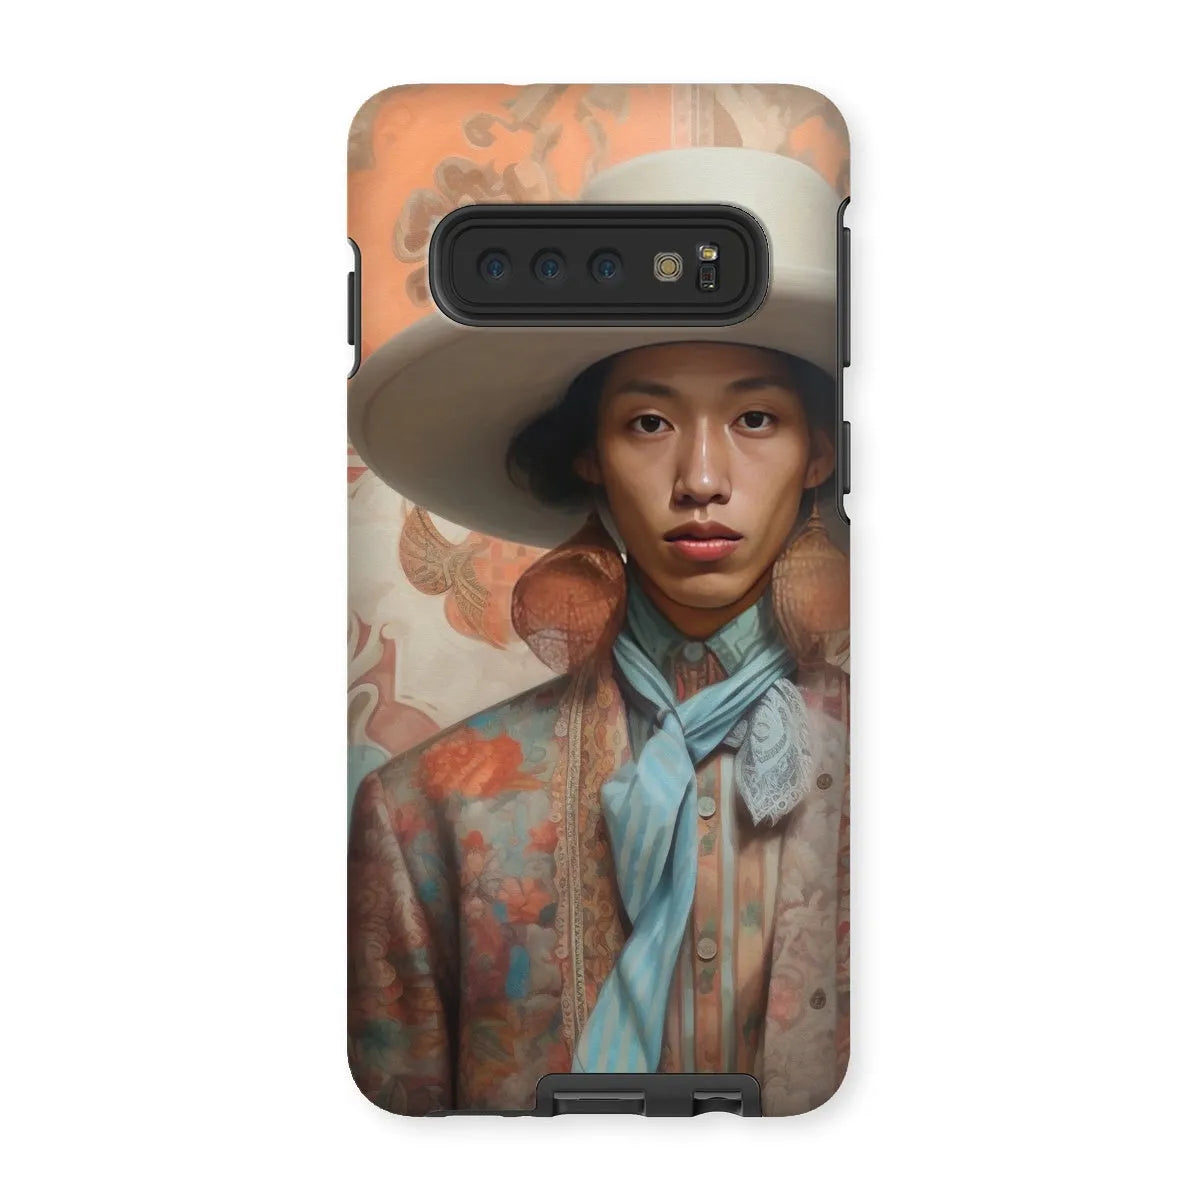 Iyaan The Gay Cowboy - Dandy Gay Aesthetic Art Phone Case - Samsung Galaxy S10 / Matte - Mobile Phone Cases - Aesthetic